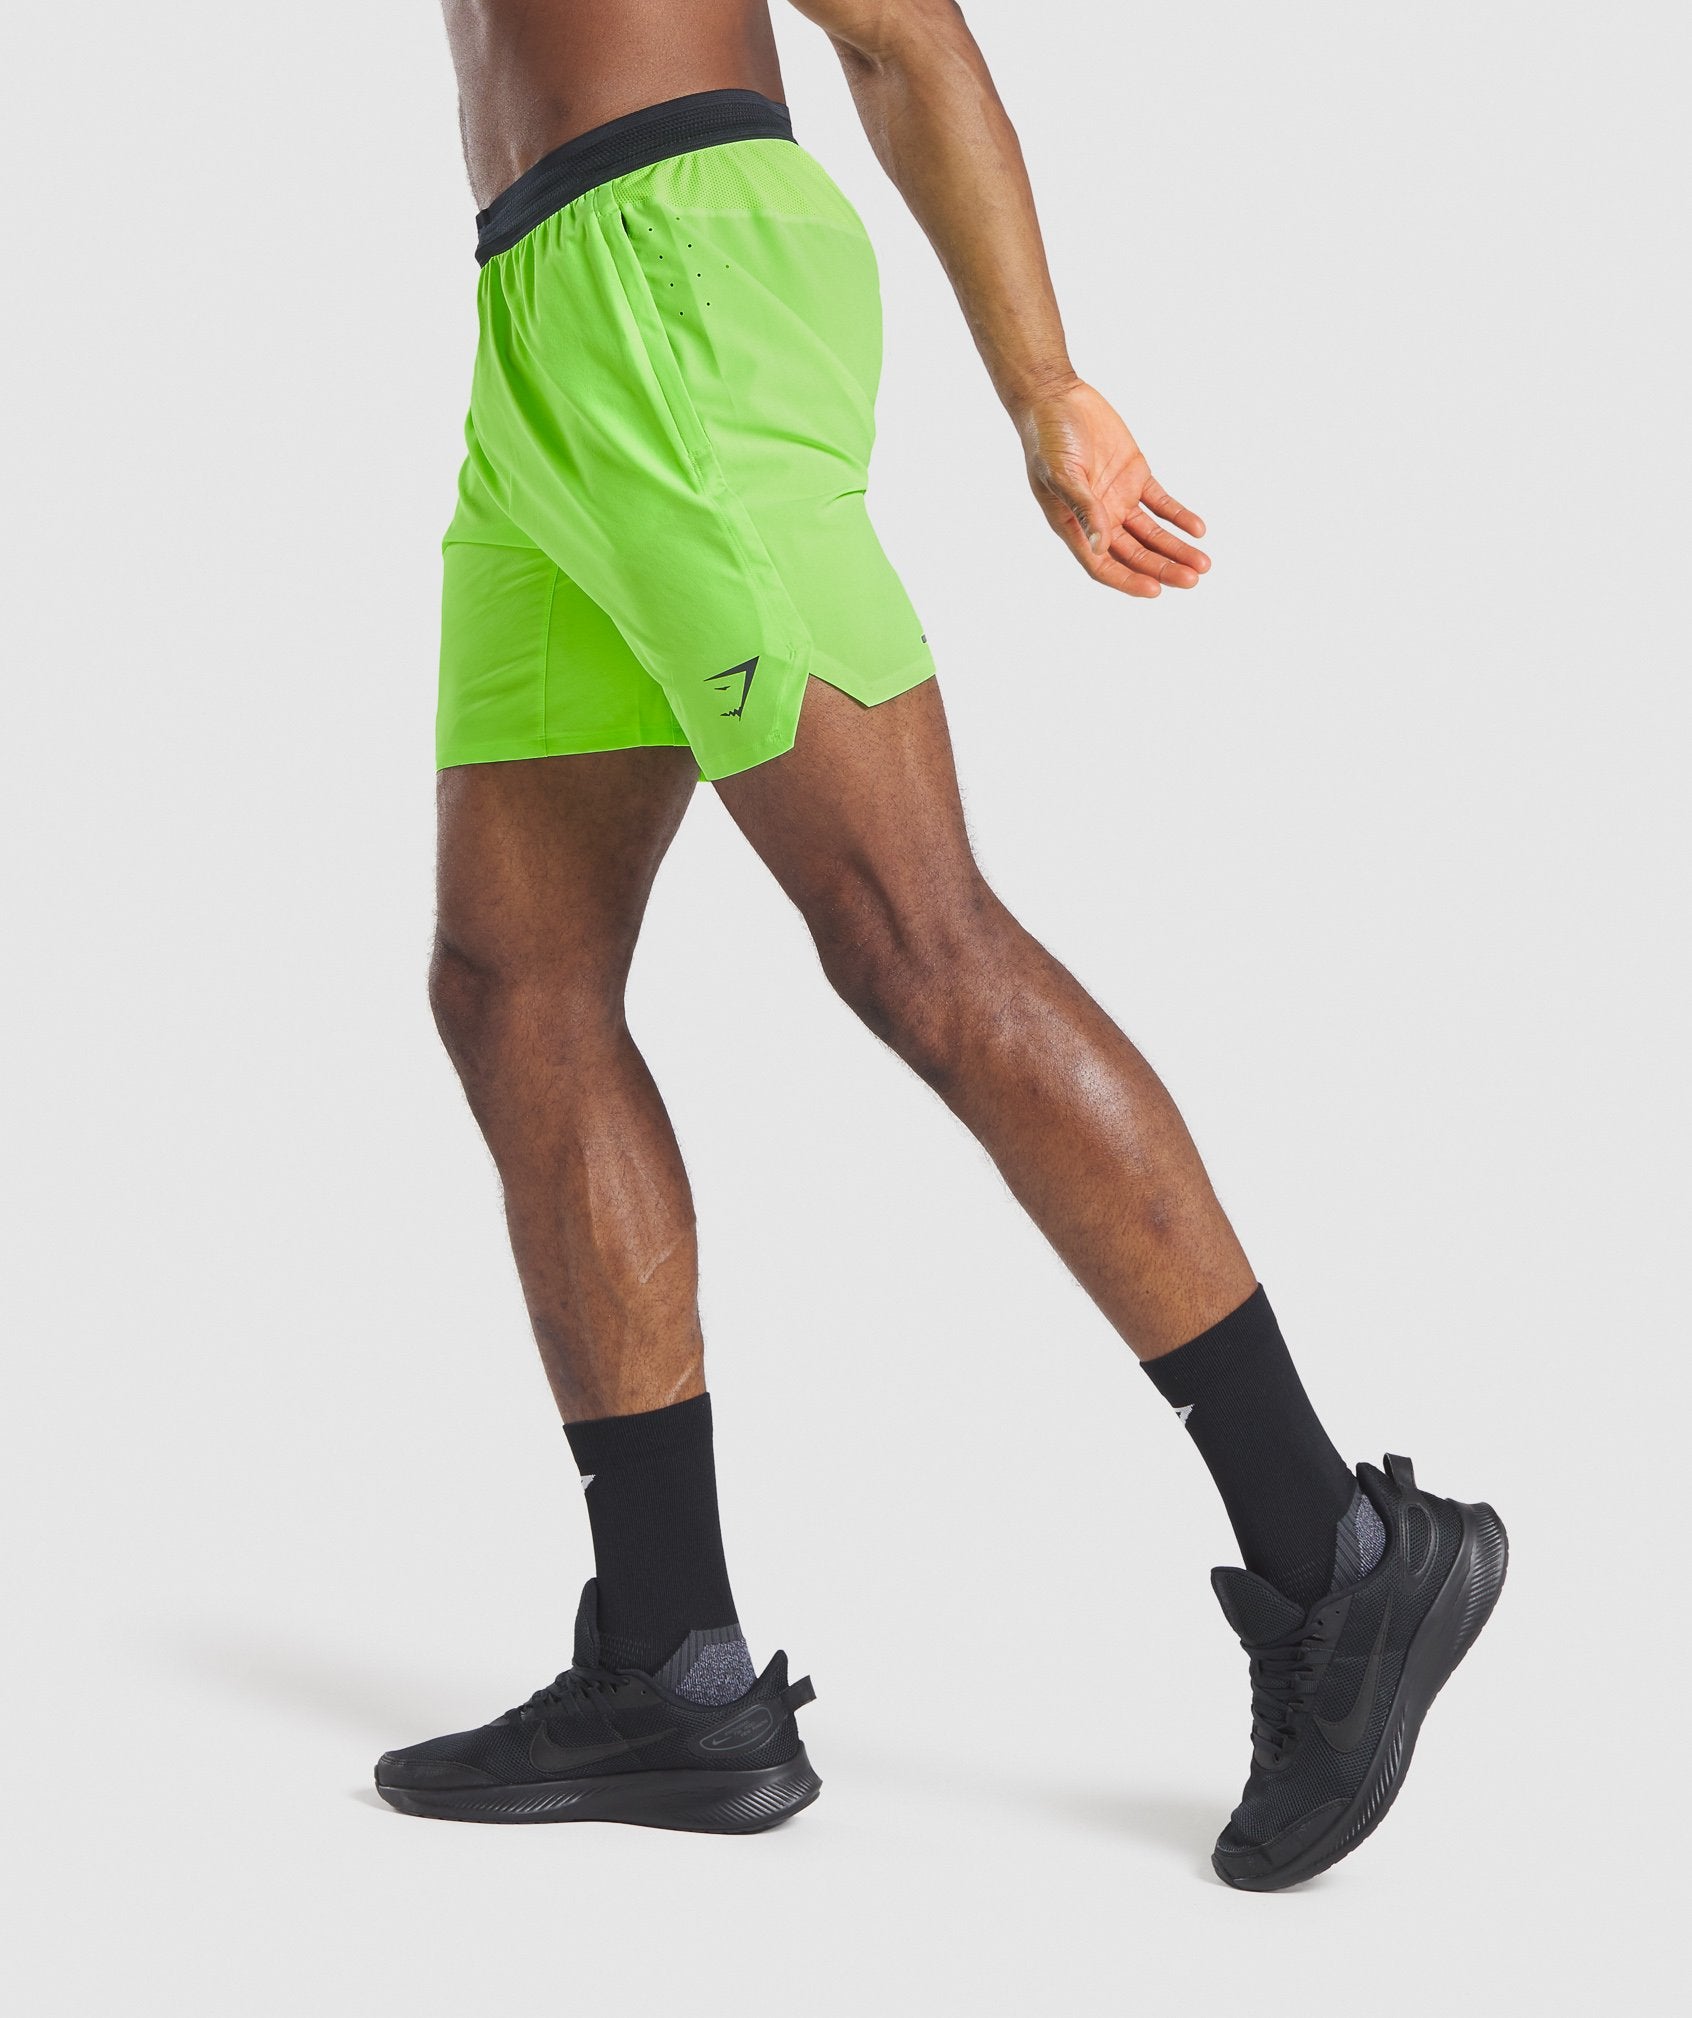 Speed 7" Shorts in Lime - view 4